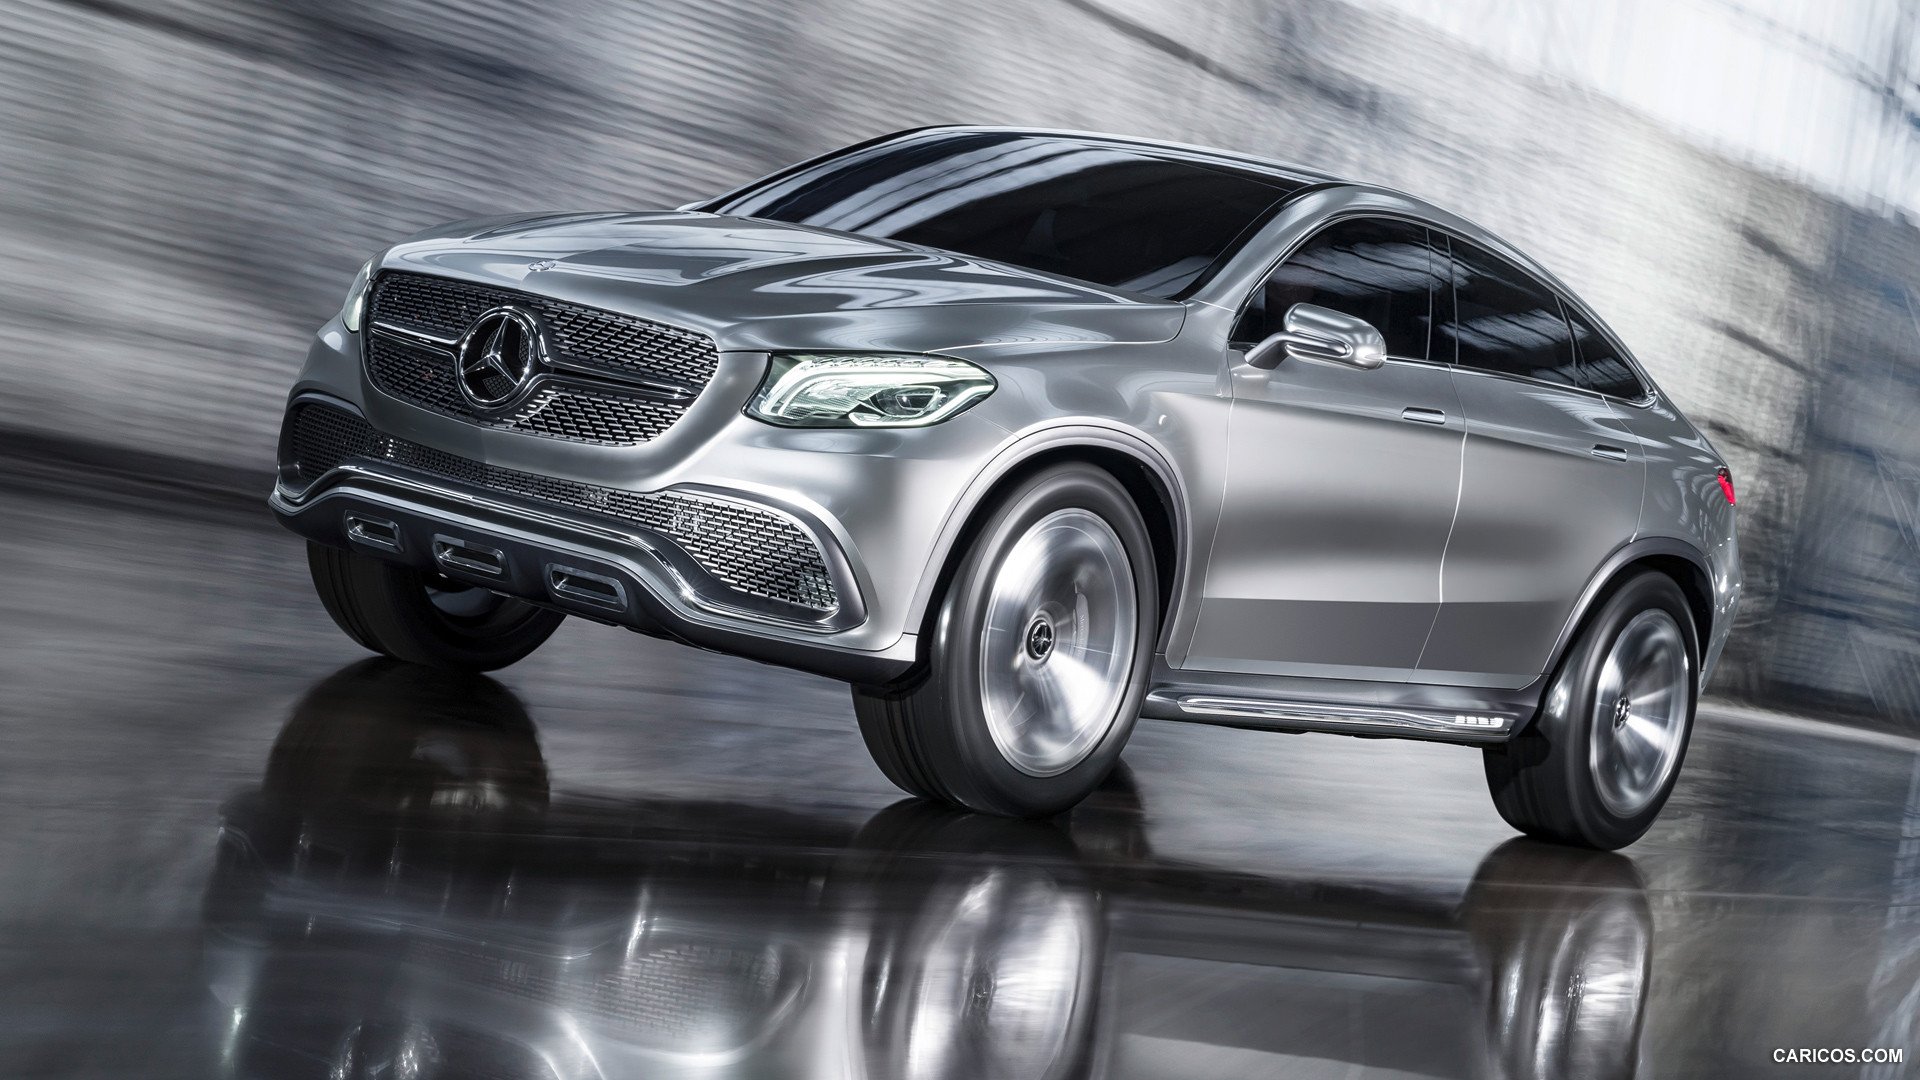 2014 Mercedes-Benz Coupe SUV Concept  - Front, #1 of 17